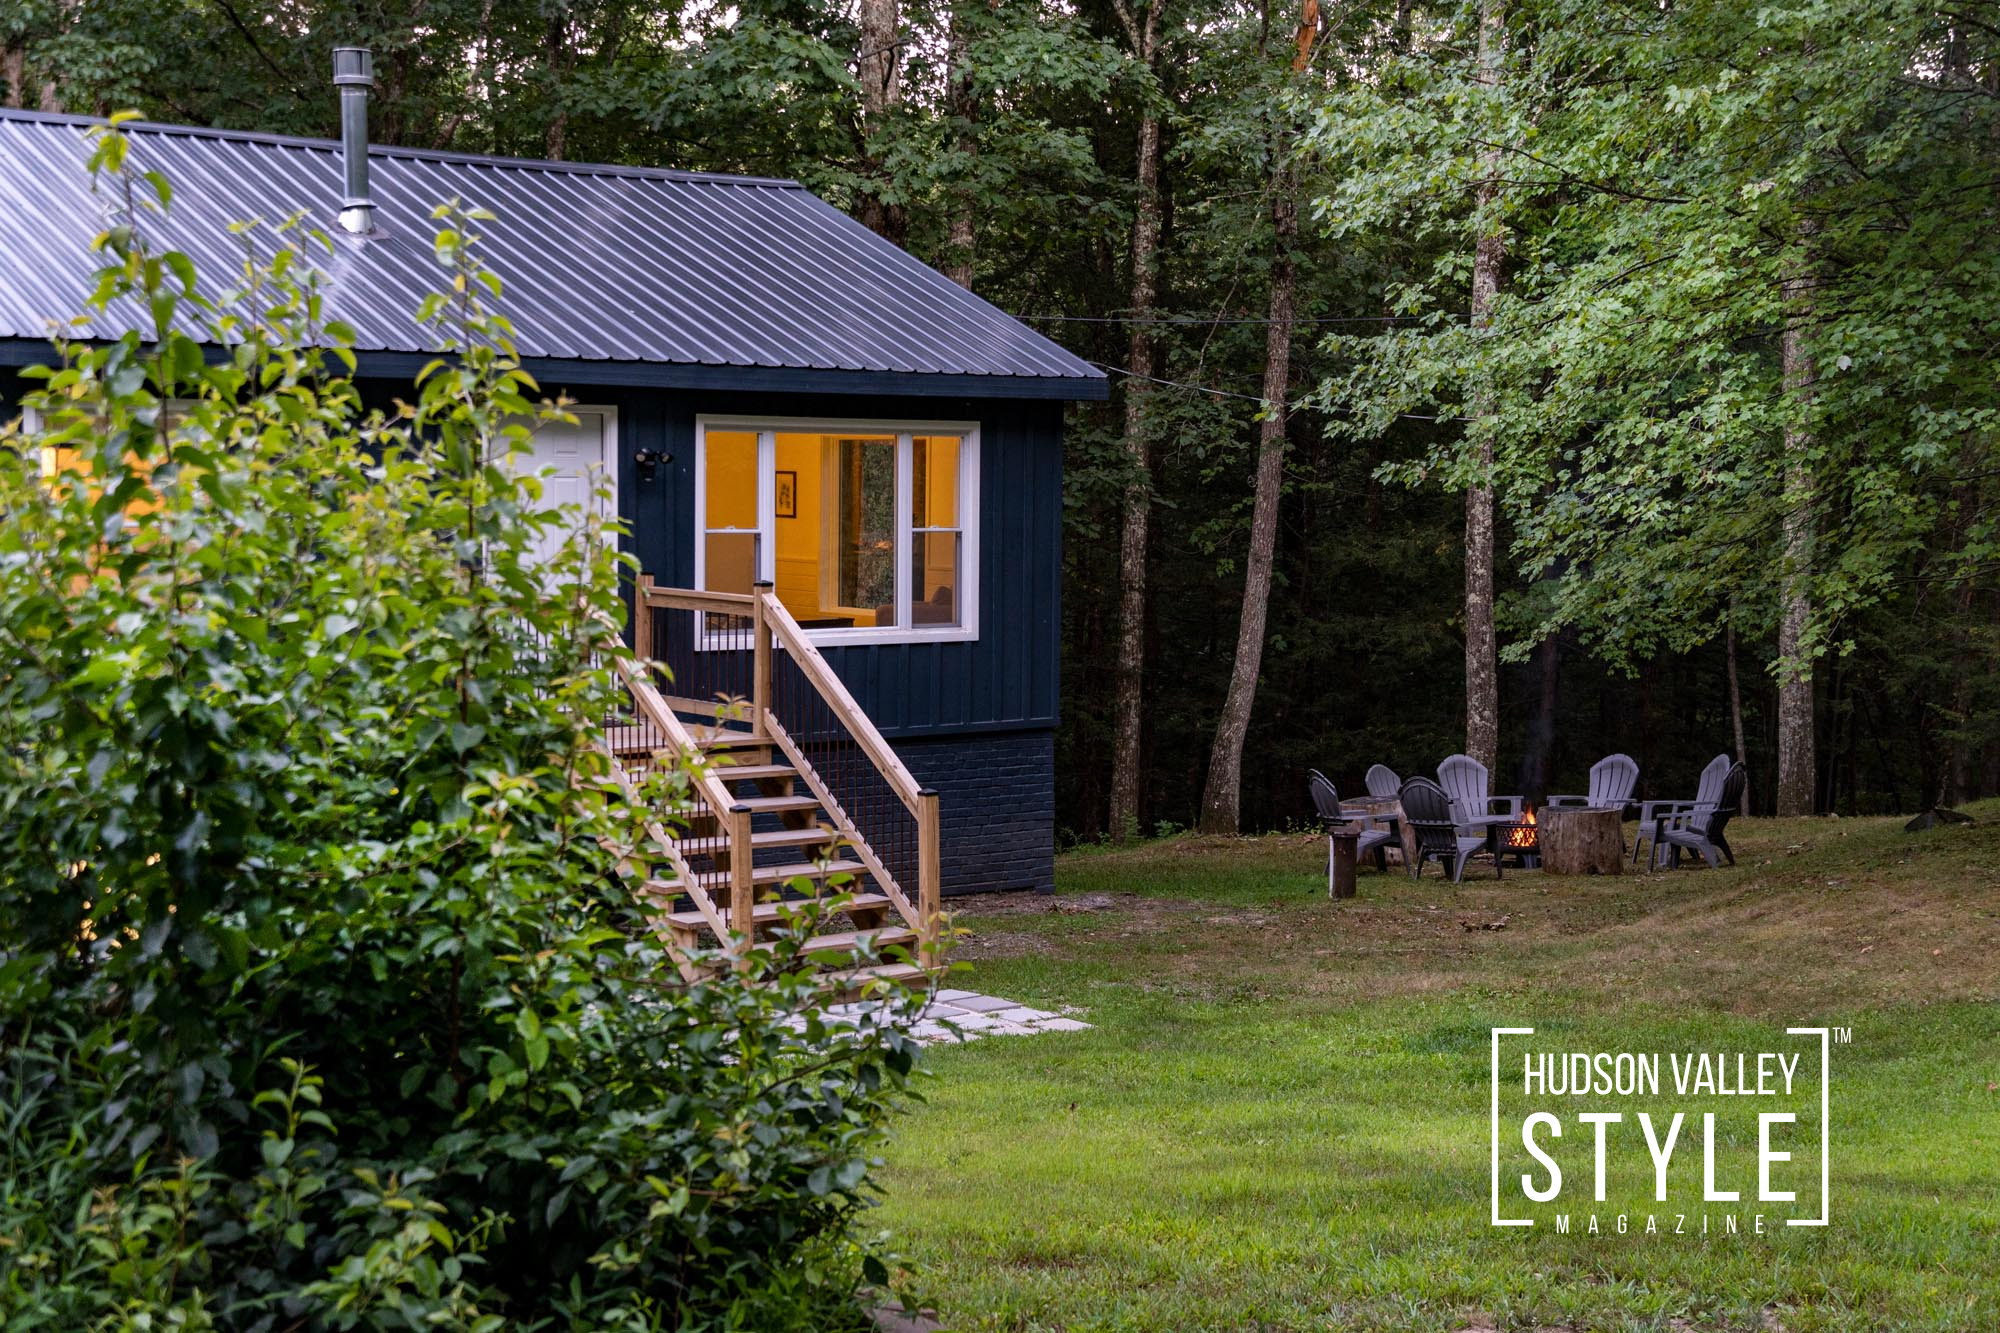 Good Vibes Only: Airbnb Review of an Upstate Airbnb Listing by Photographer Maxwell Alexander – Airbnb Photography for Duncan Avenue Studios (NYC) + Alluvion Media (Hudson Valley) – Dusk Photography – Twilight Photography – Editorial and Lifestyle Photography